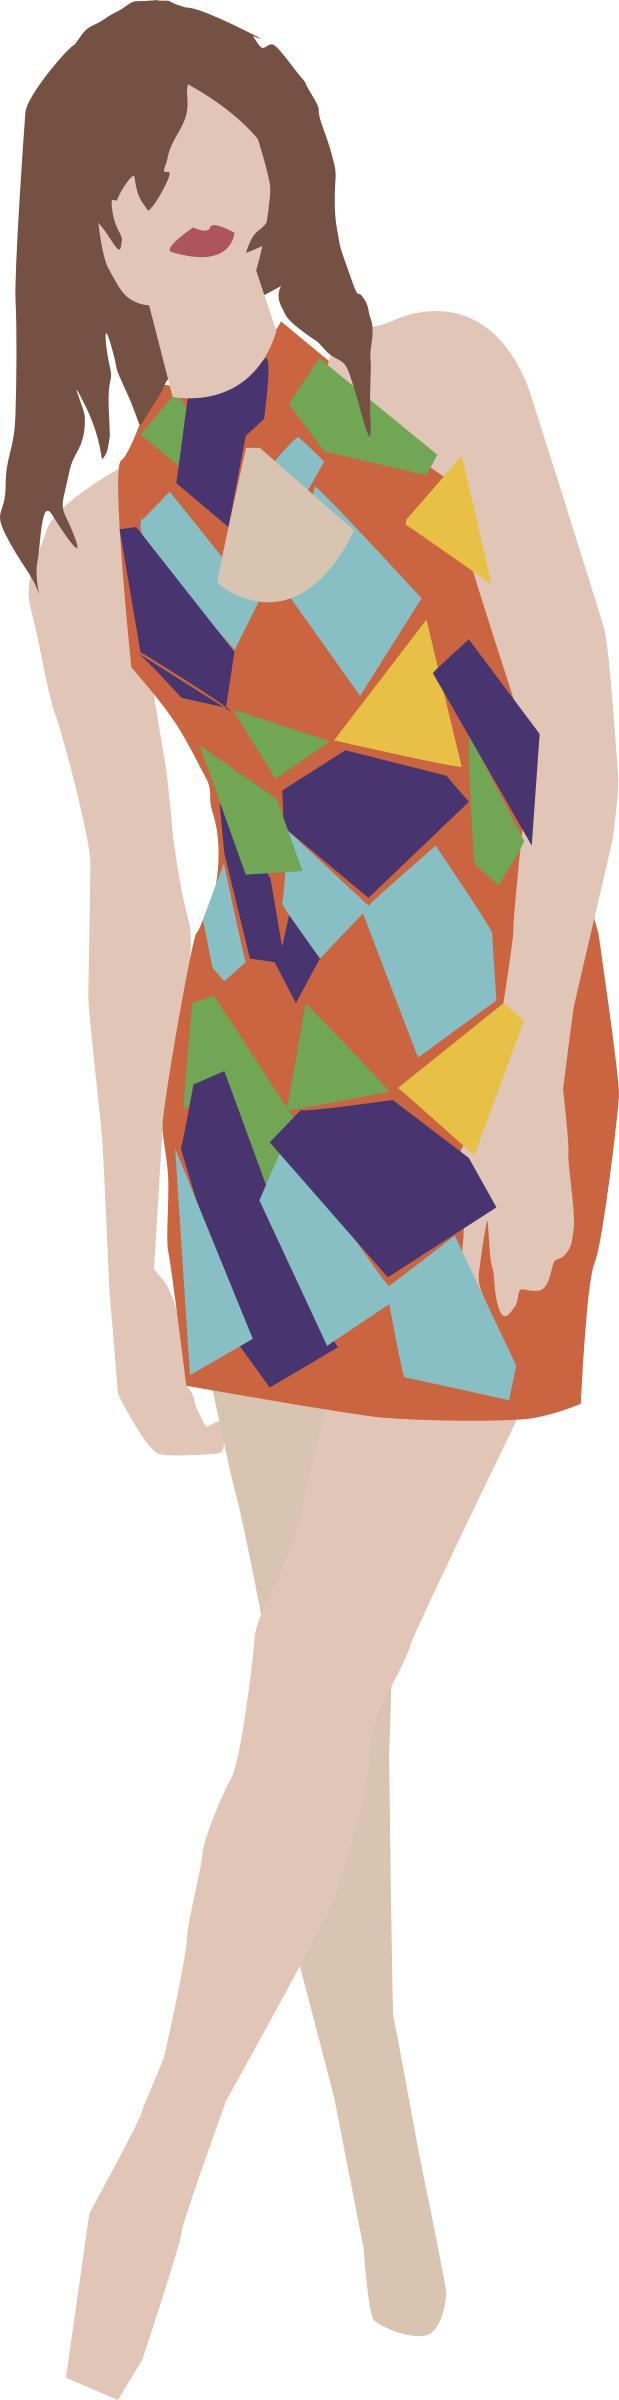 Girl In A Dress png transparent